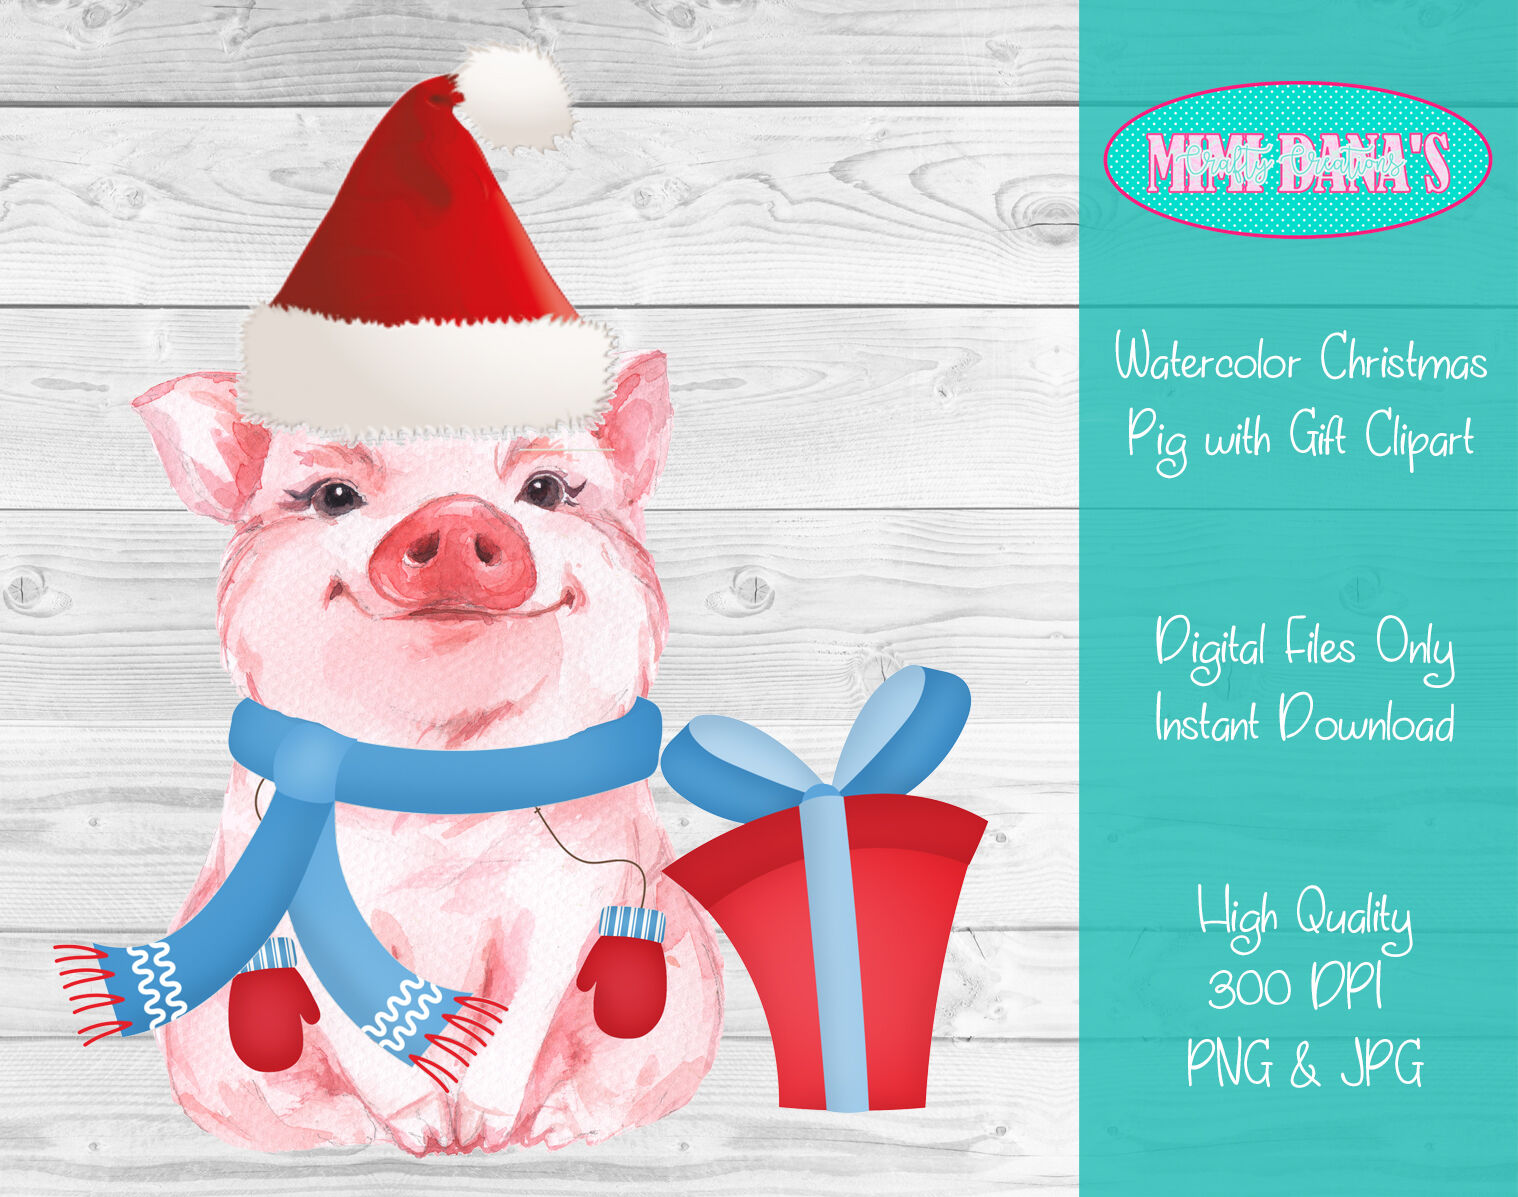 Watercolor Christmas Pig With Gift Clipart By Mimi Dana S Crafty Creations Thehungryjpeg Com